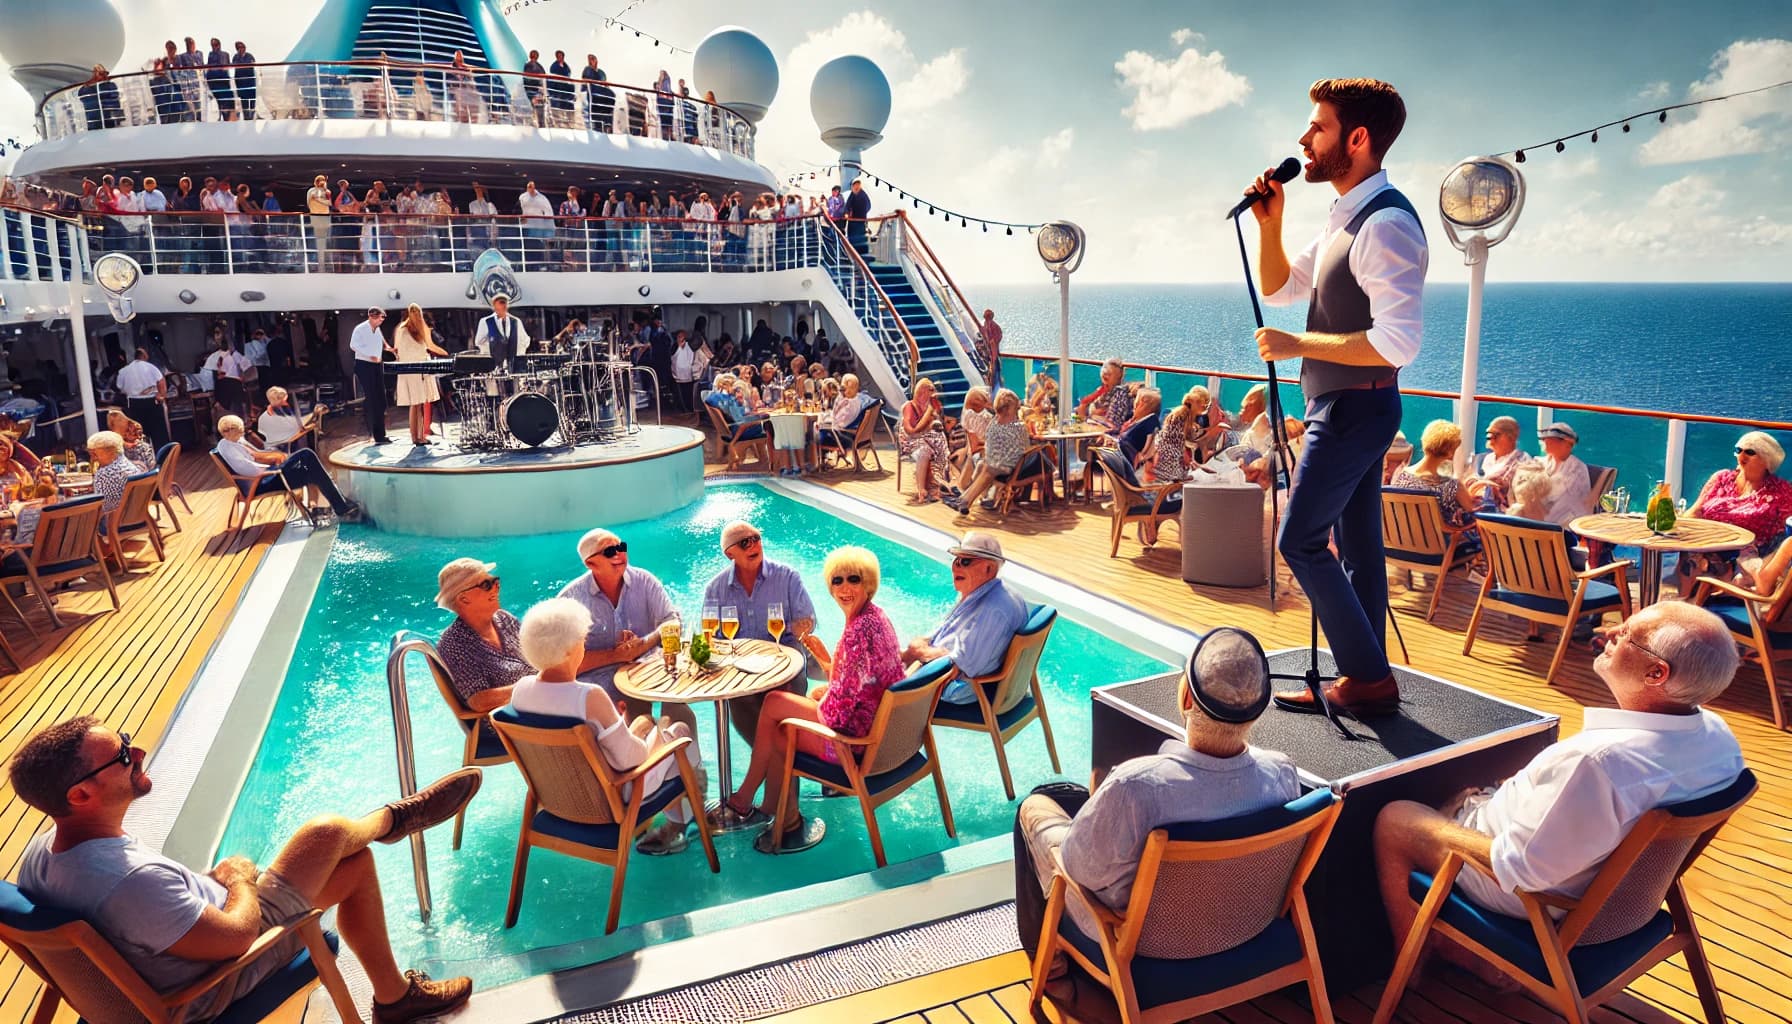 A singer performing to guests by the pool on a cruise ship